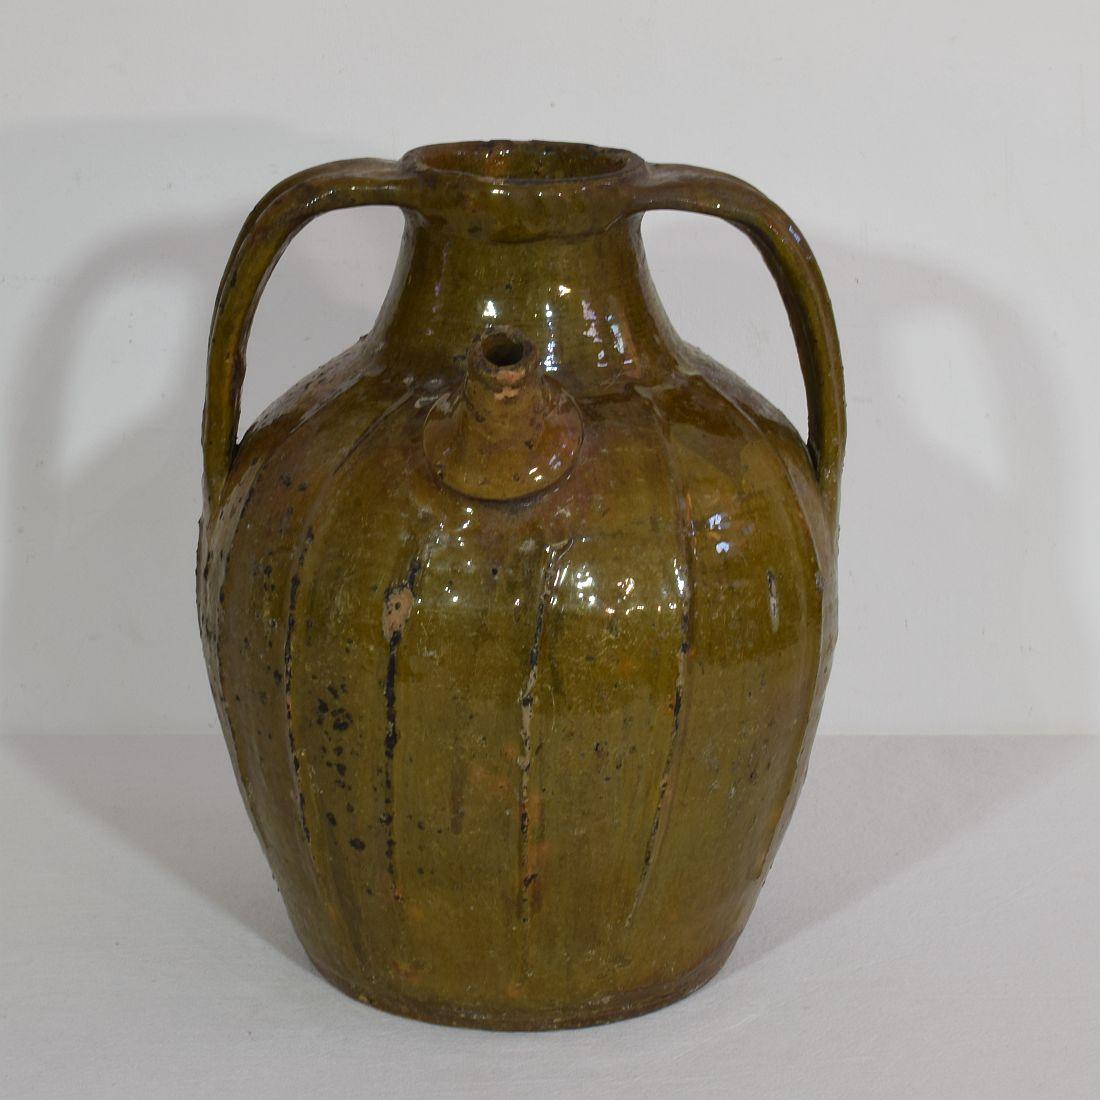 French walnut oil jug from the Auvergne region in France. A large three-handled brown-glazed terracotta storage vessel, with pouring spout. It is a rare piece that once was characteristic for this region in France. The jug is in a good condition